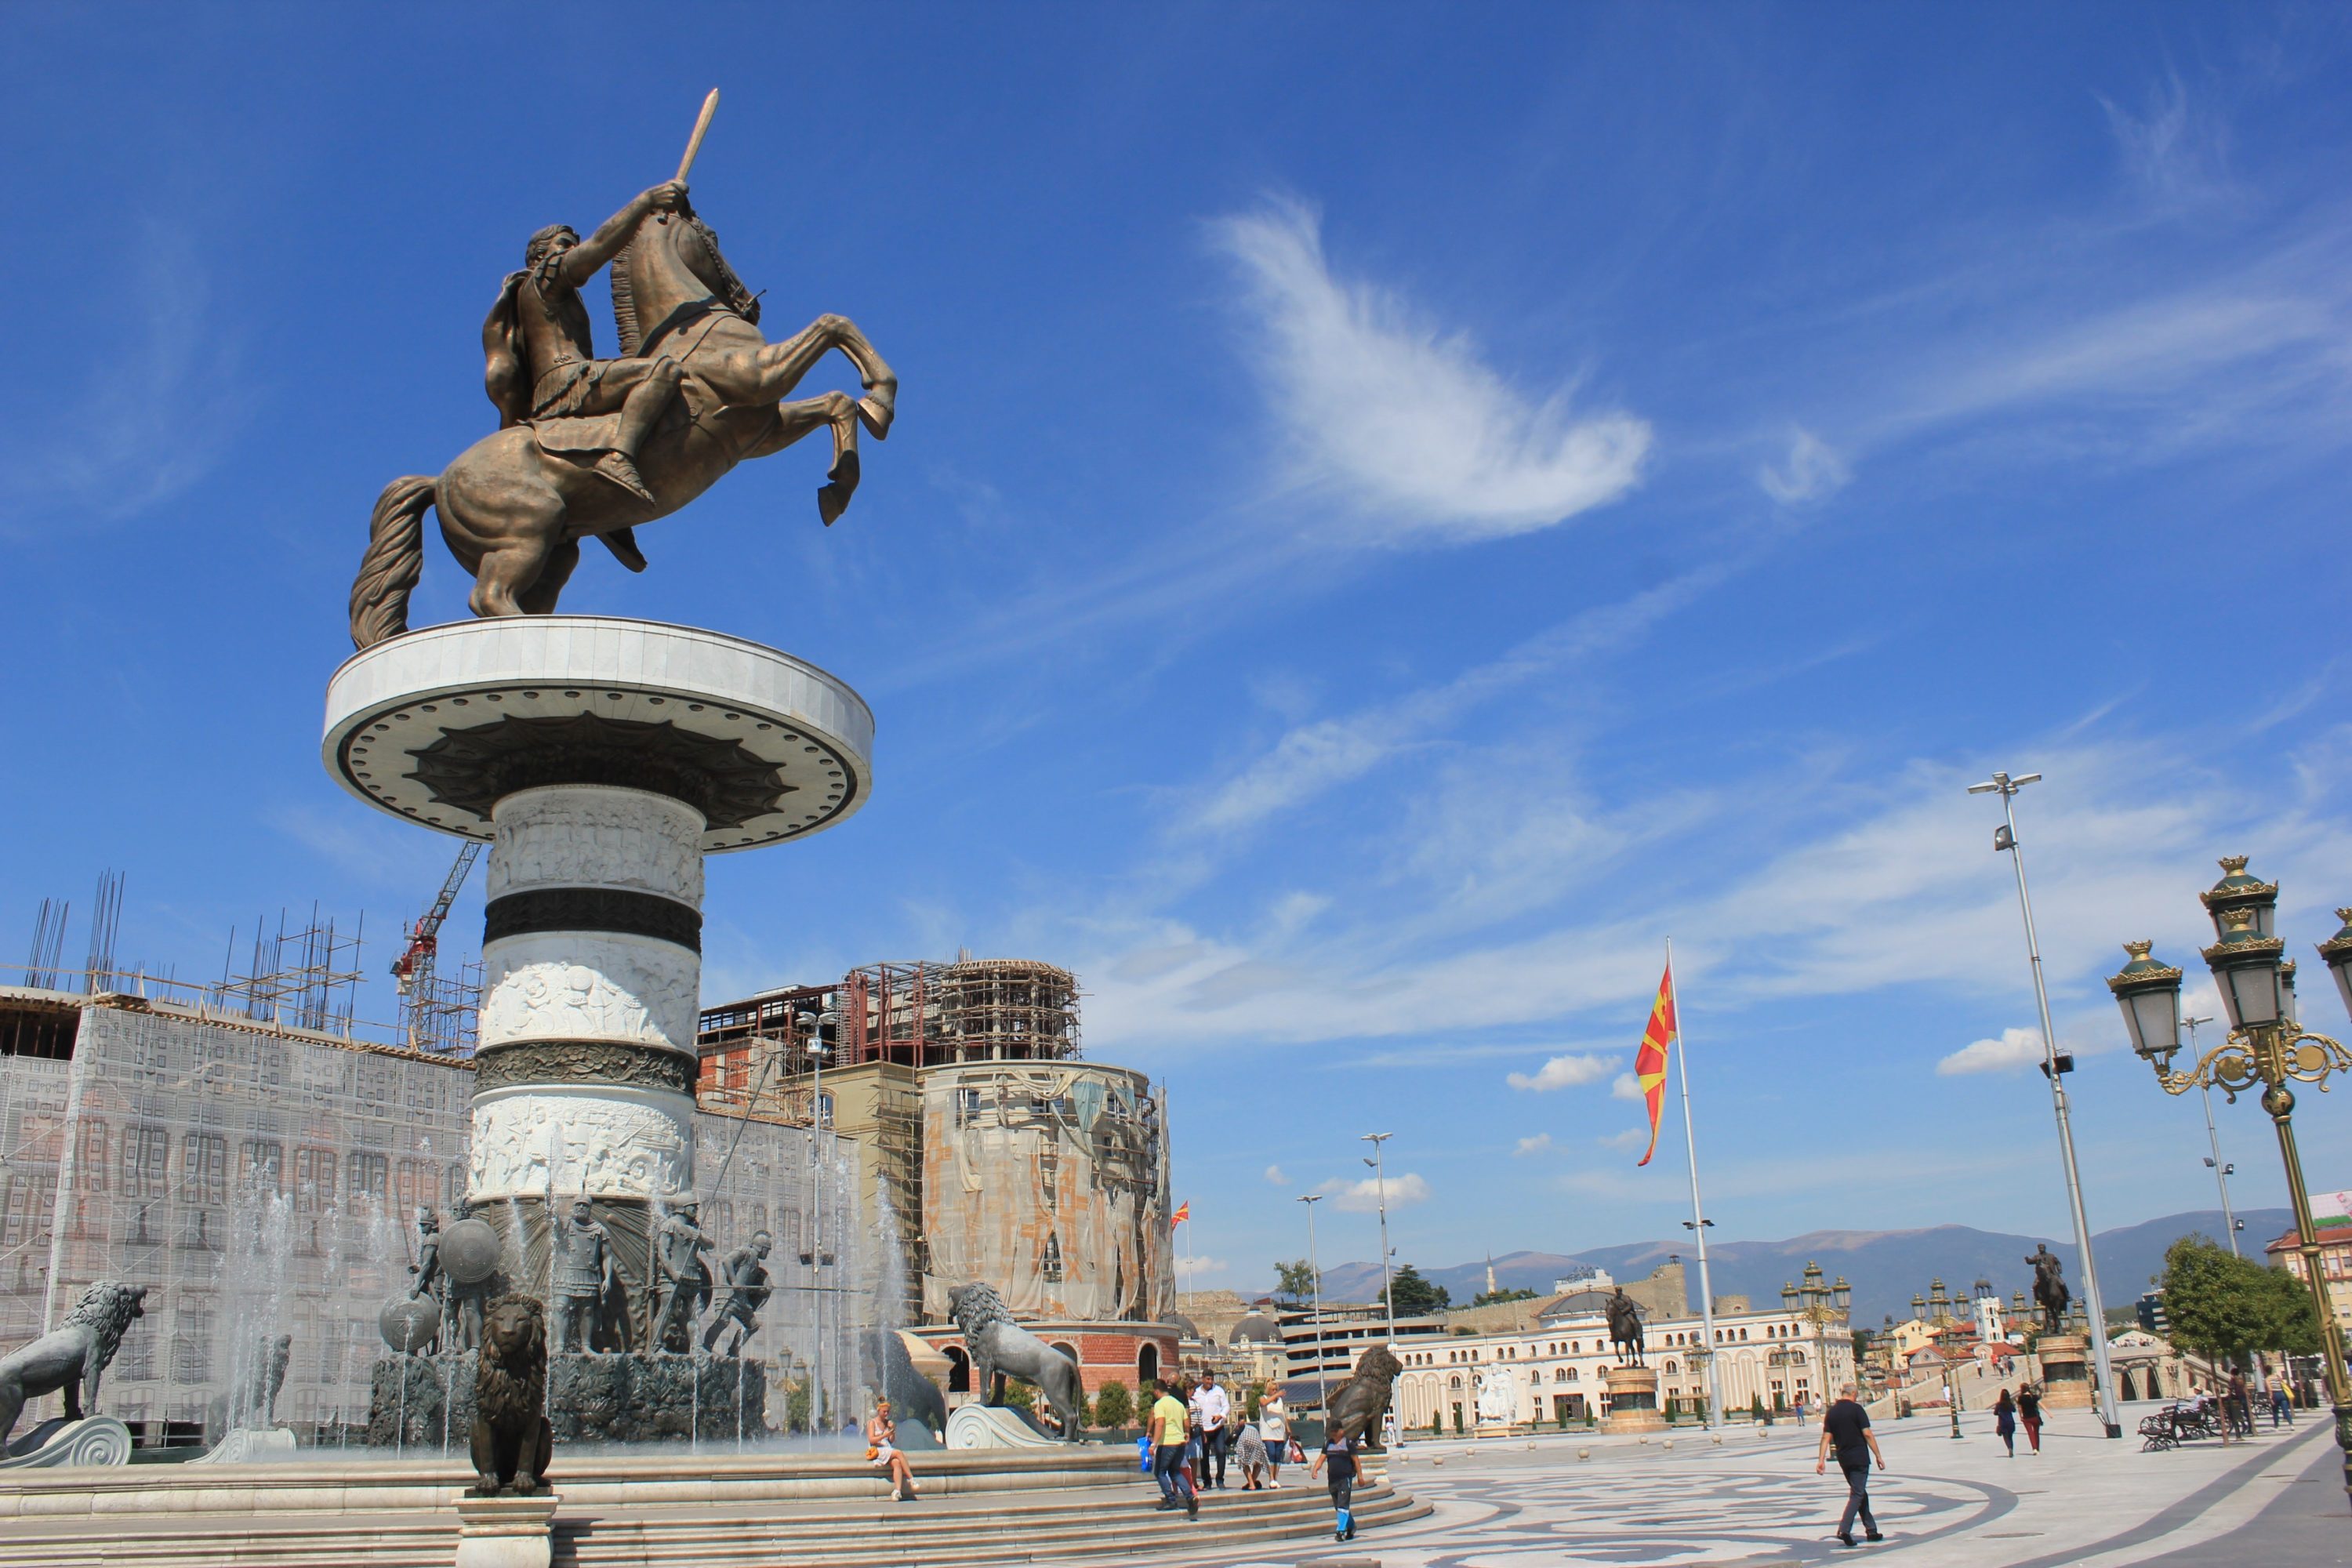 Ontological Security in the Balkans: Lessons from Macedonia